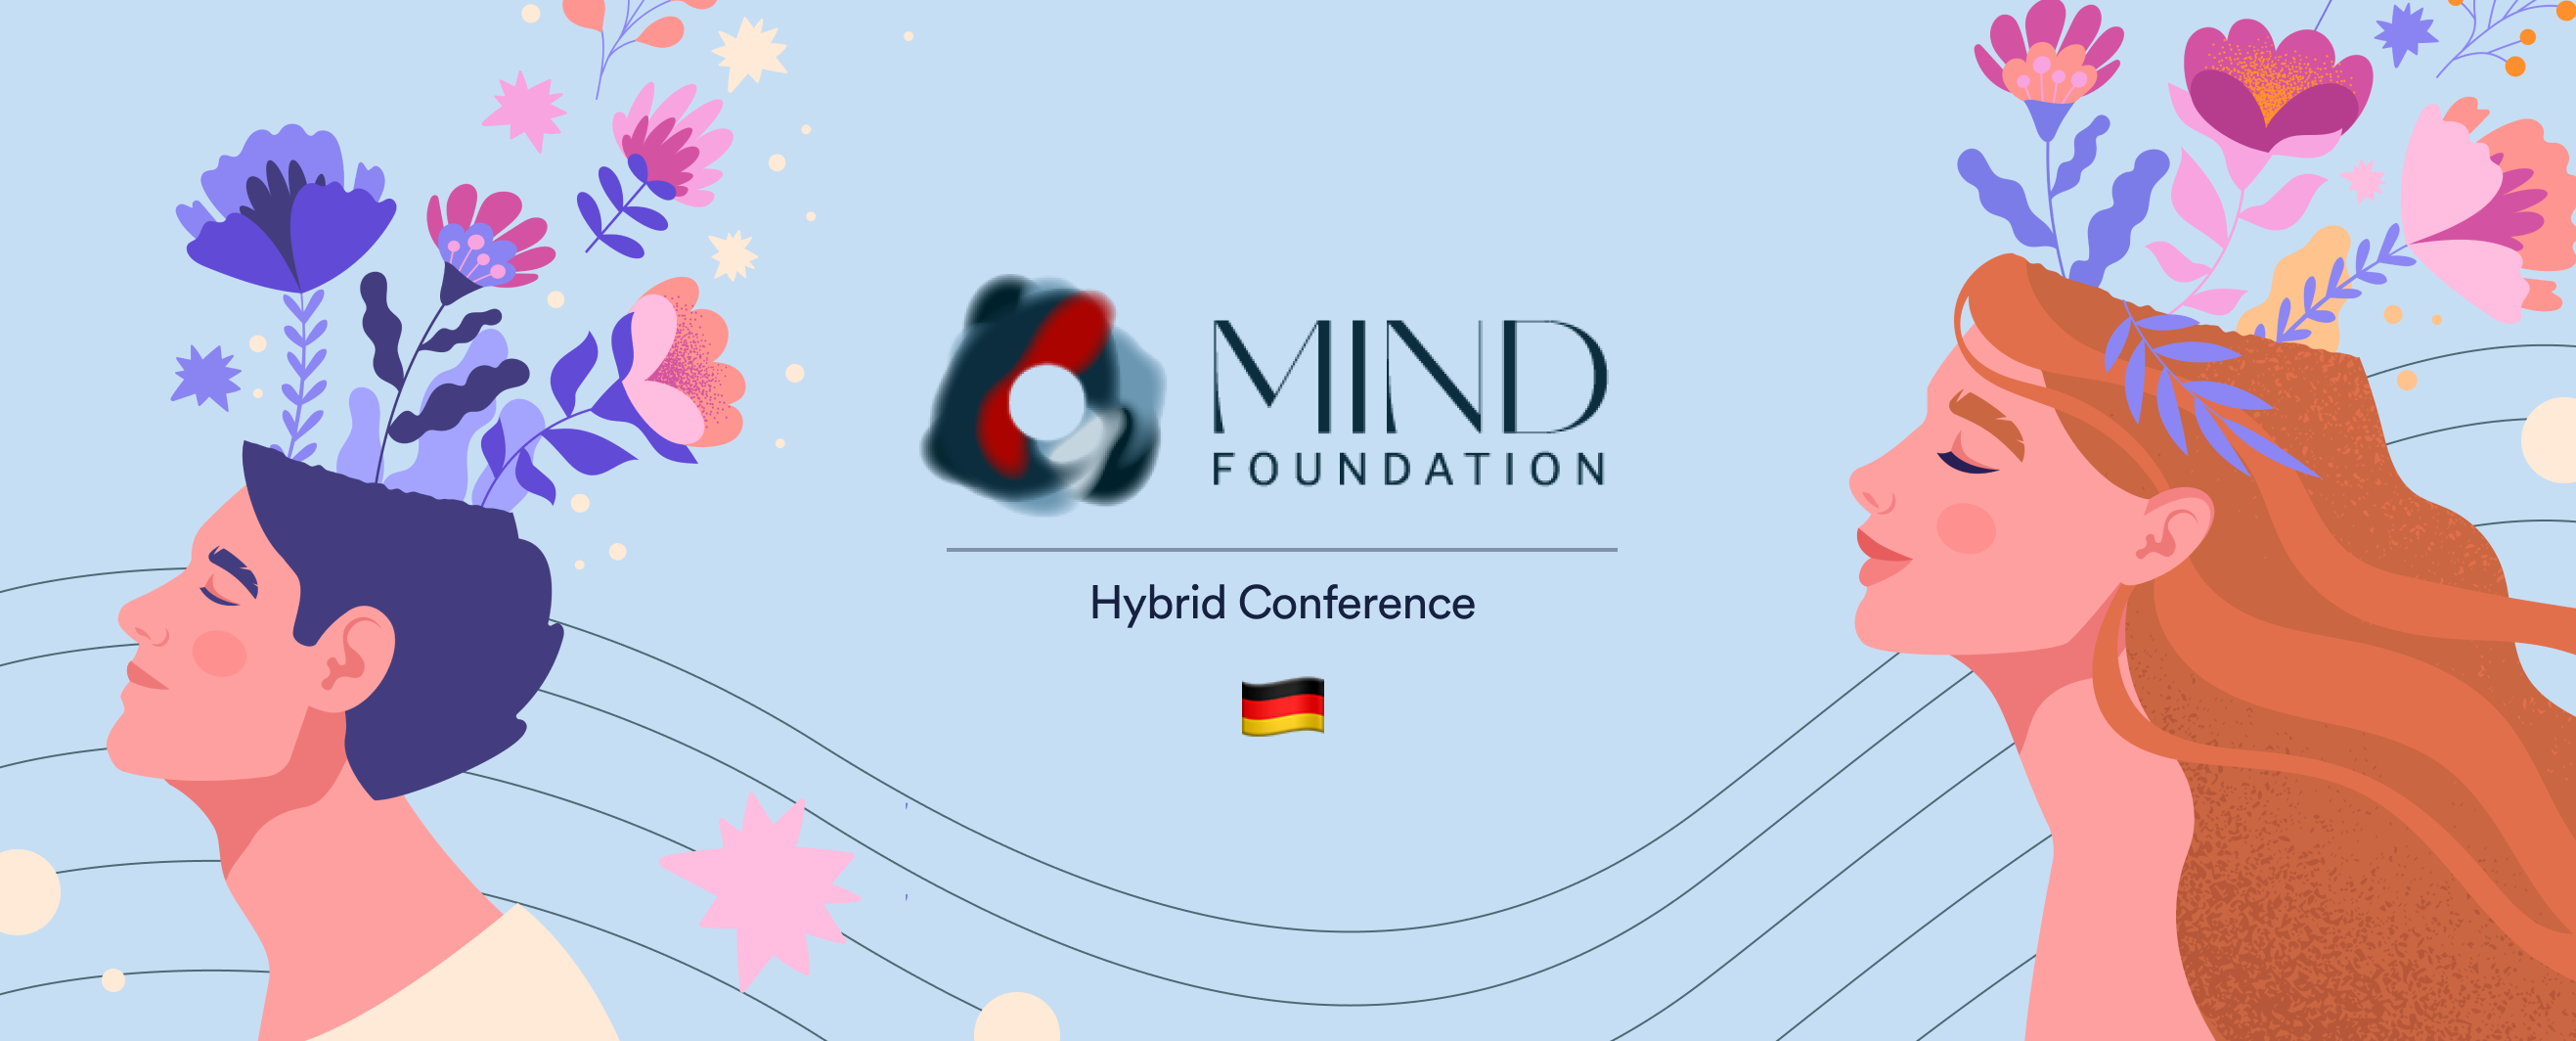 Hybrid Conference on Airmeet